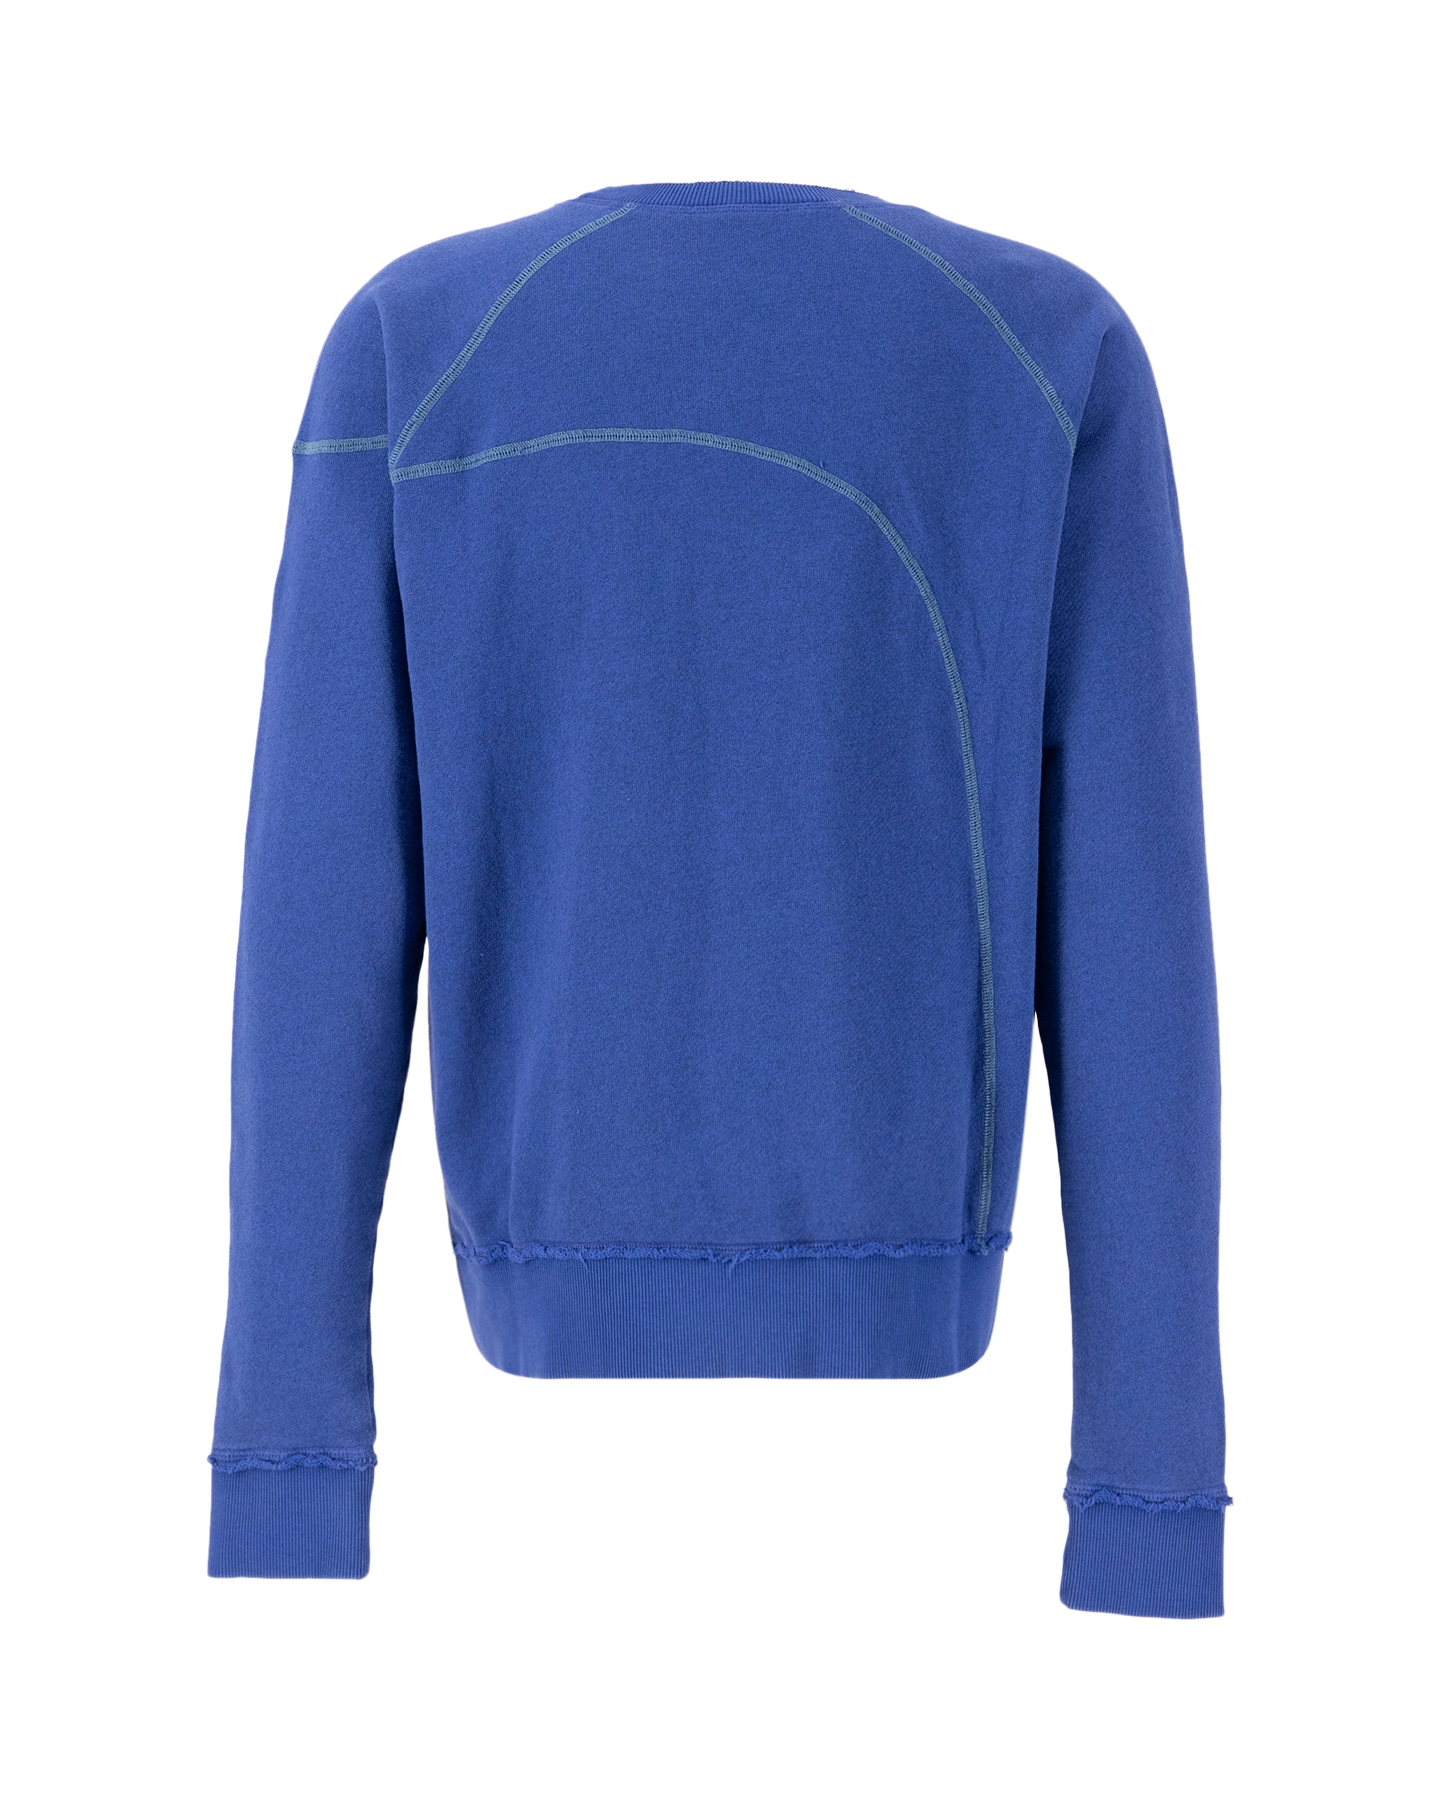 A-COLD-WALL* Intersect Crewneck BLAUW 2